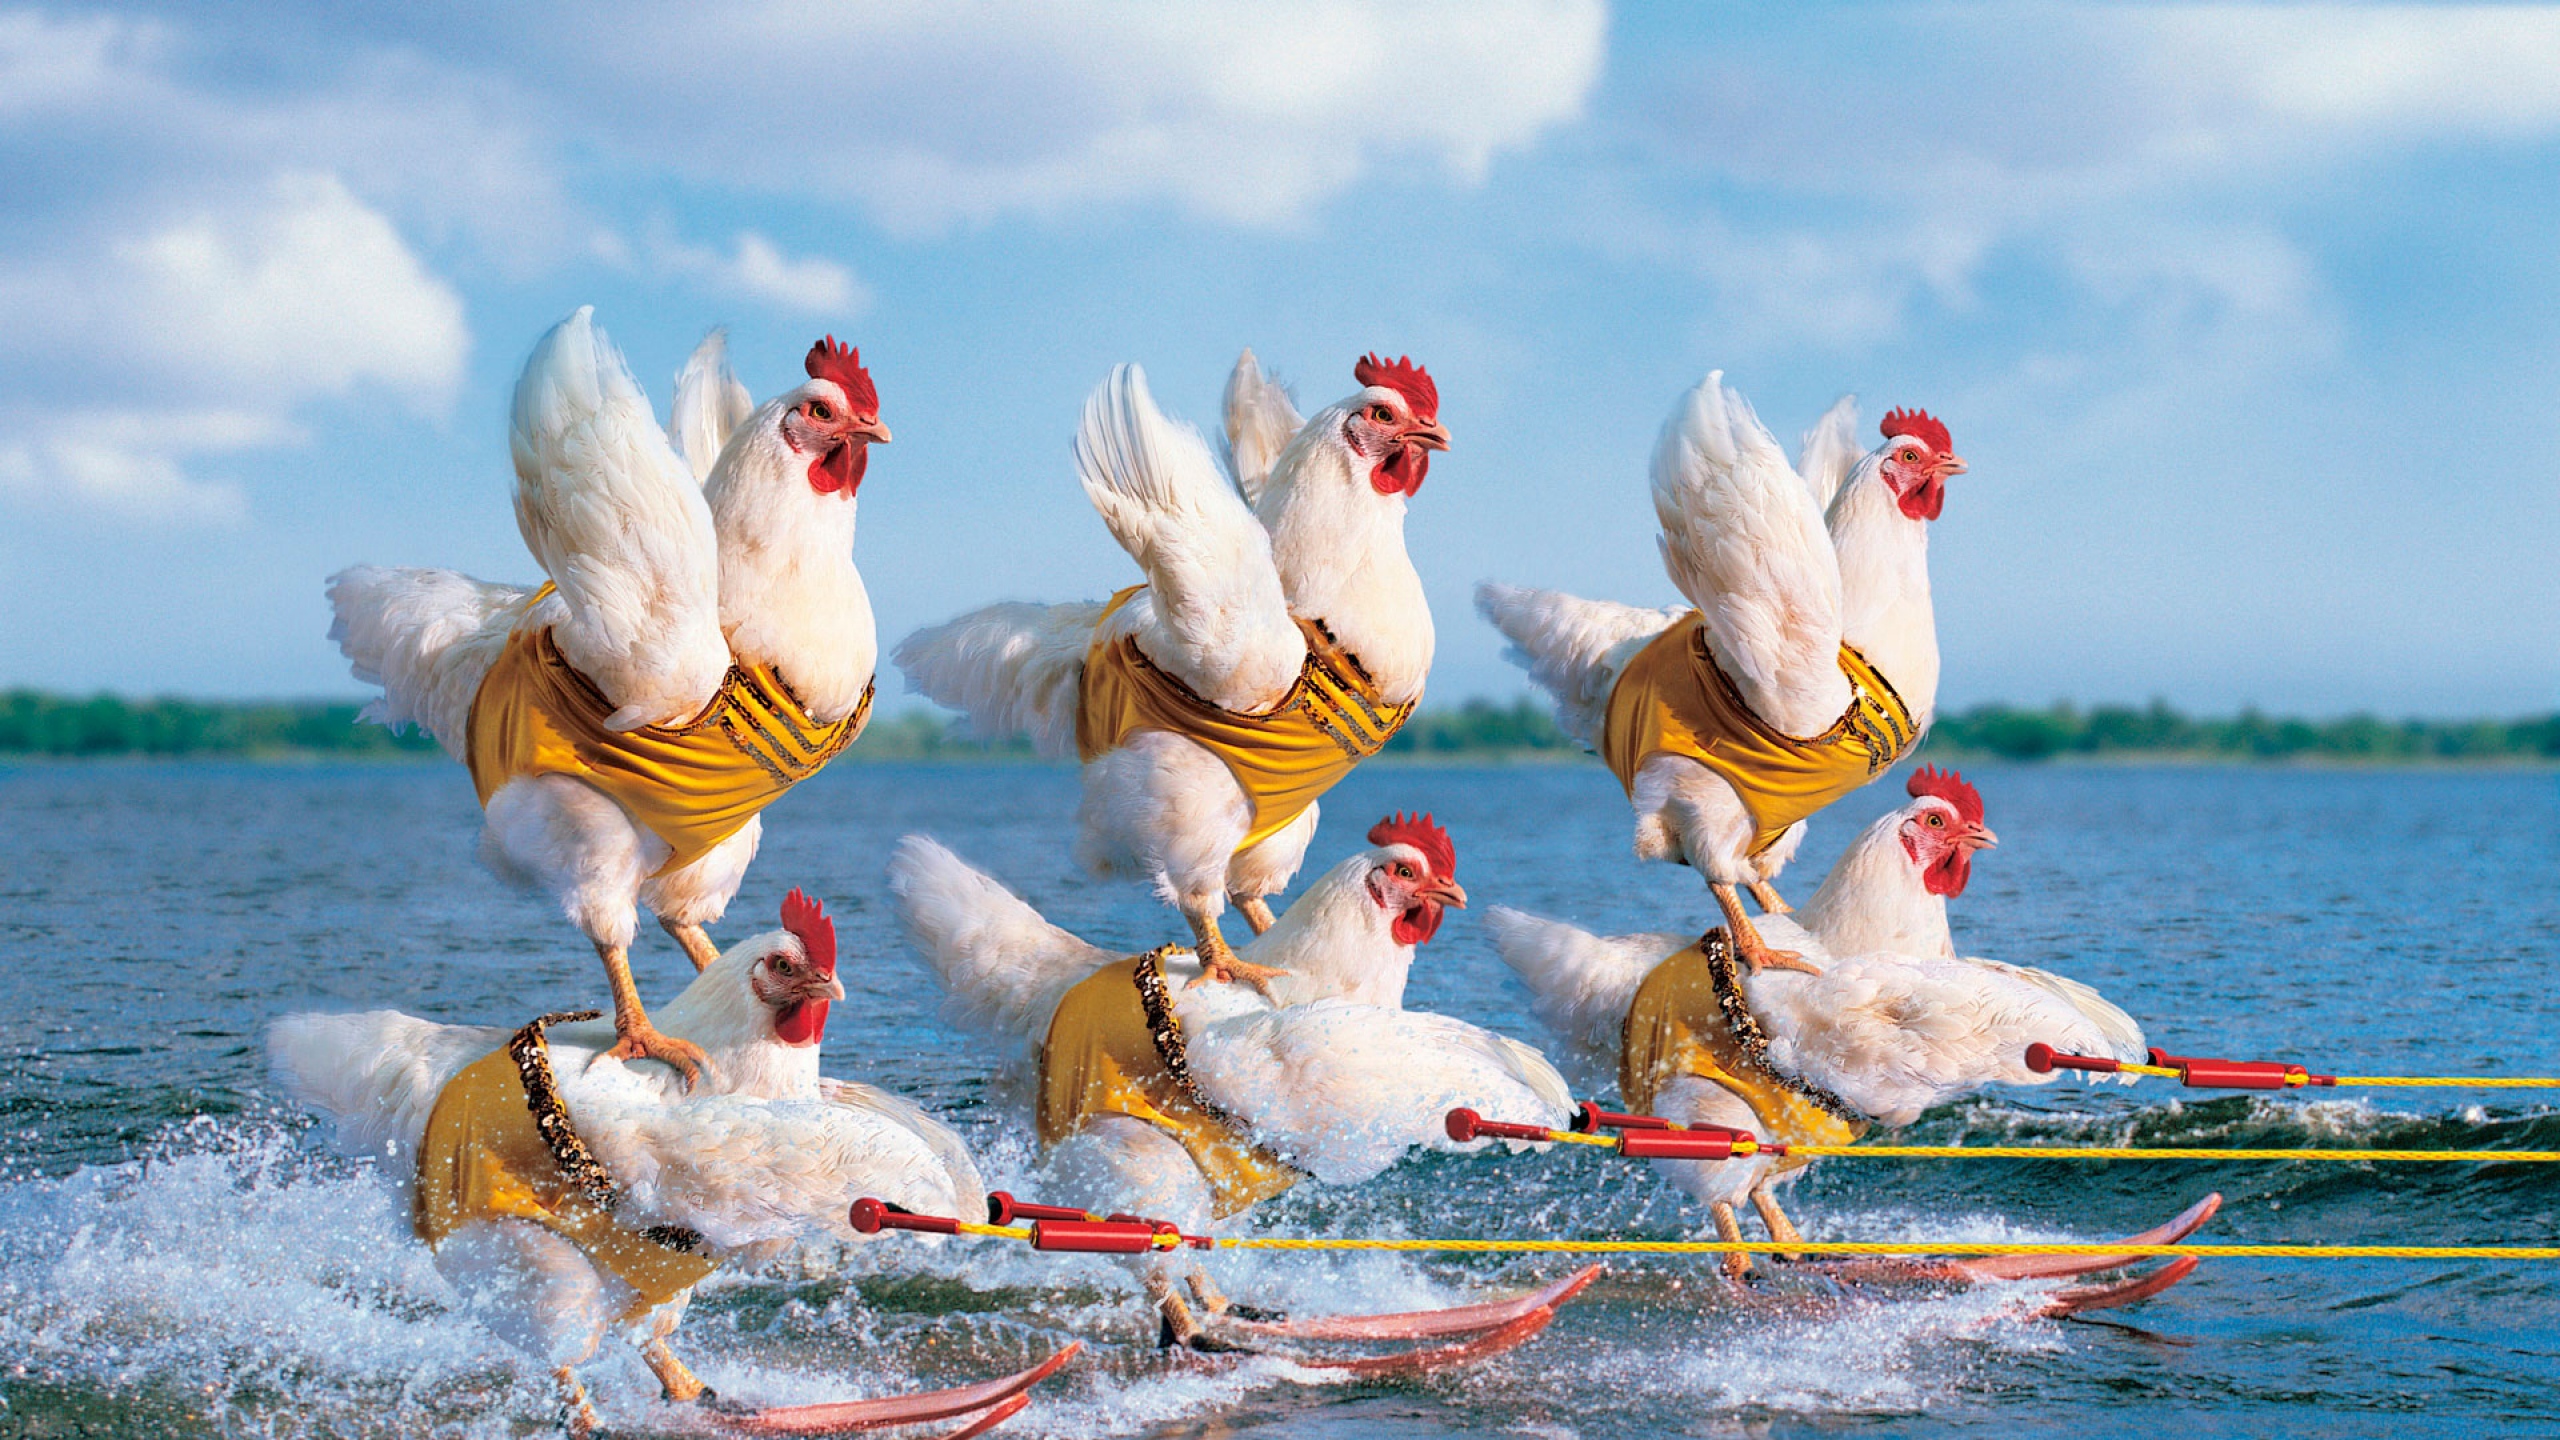 Download Wallpaper 2560x1440 Competition, Chicken, Sea, Water ...